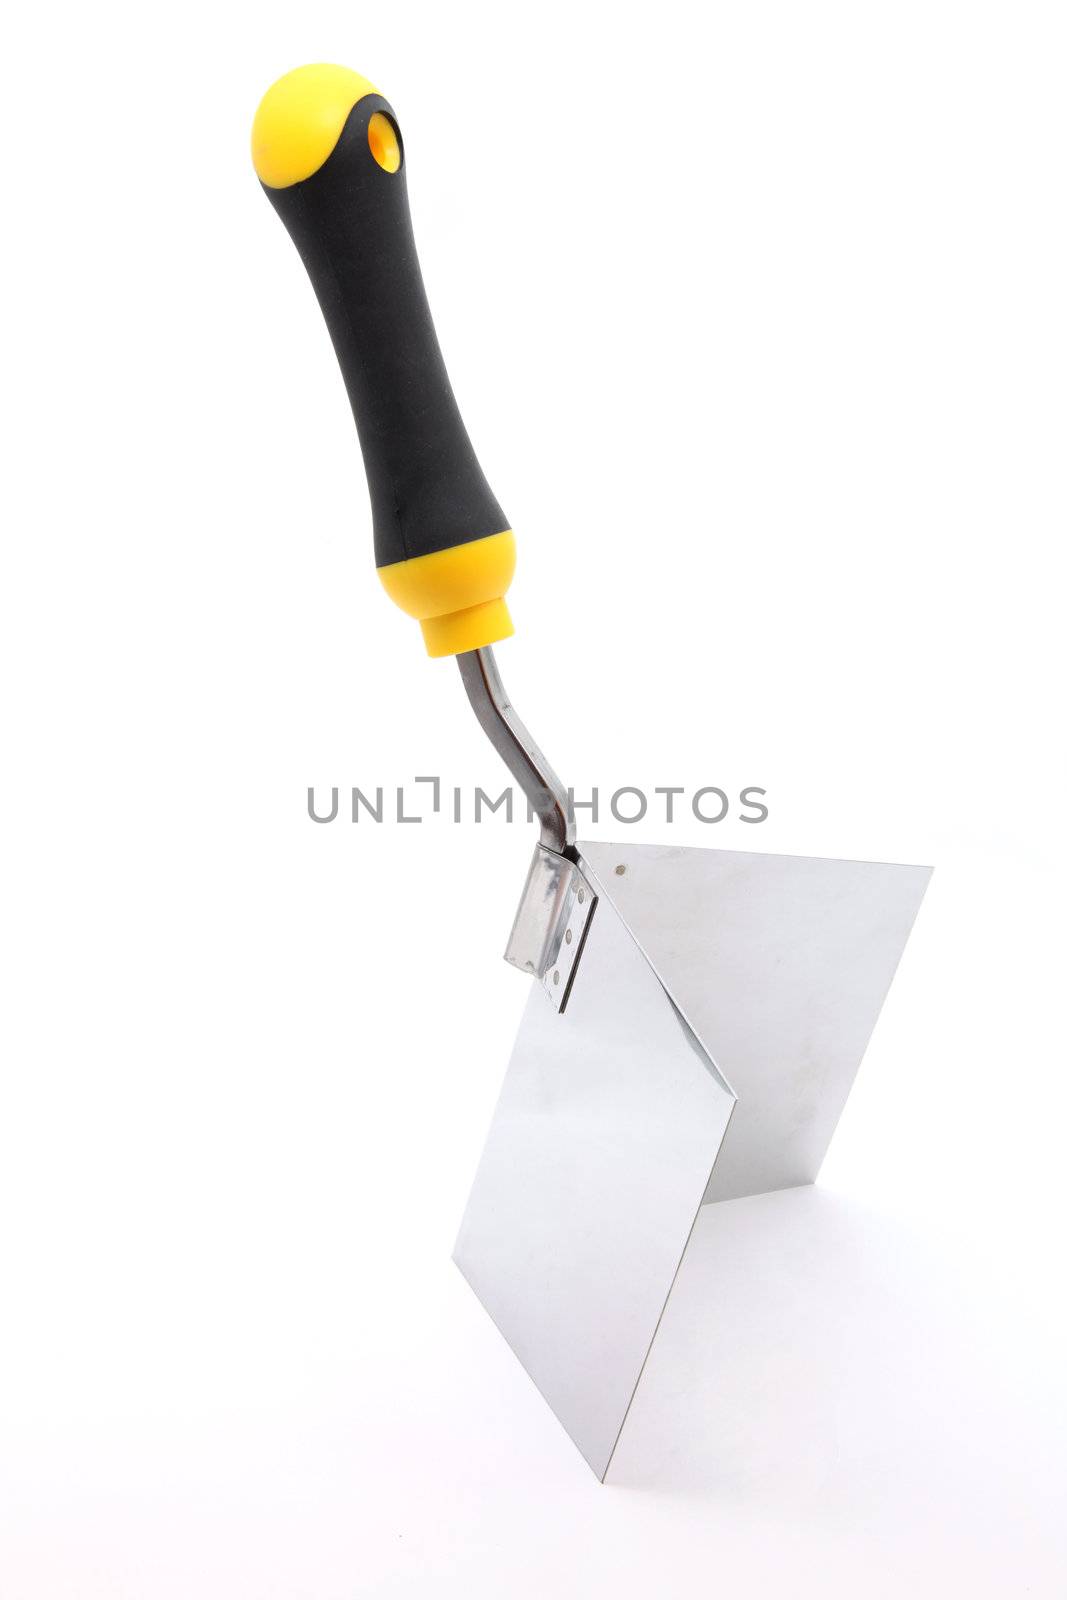 right angle construction trowel by vichie81